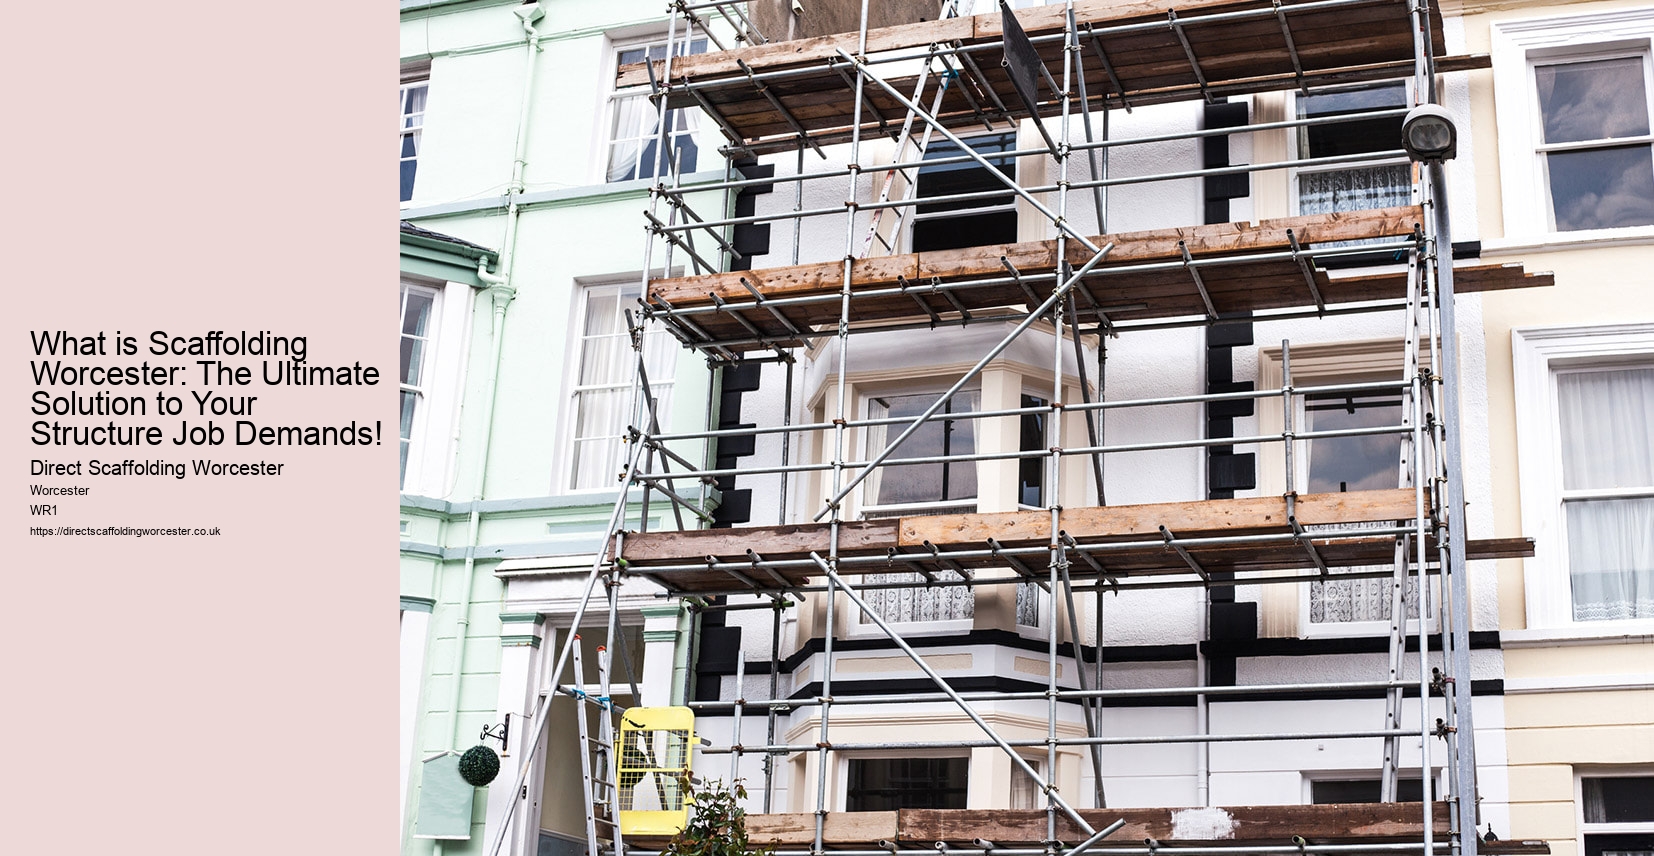 What is Scaffolding Worcester: The Ultimate Solution to Your Structure Job Demands!